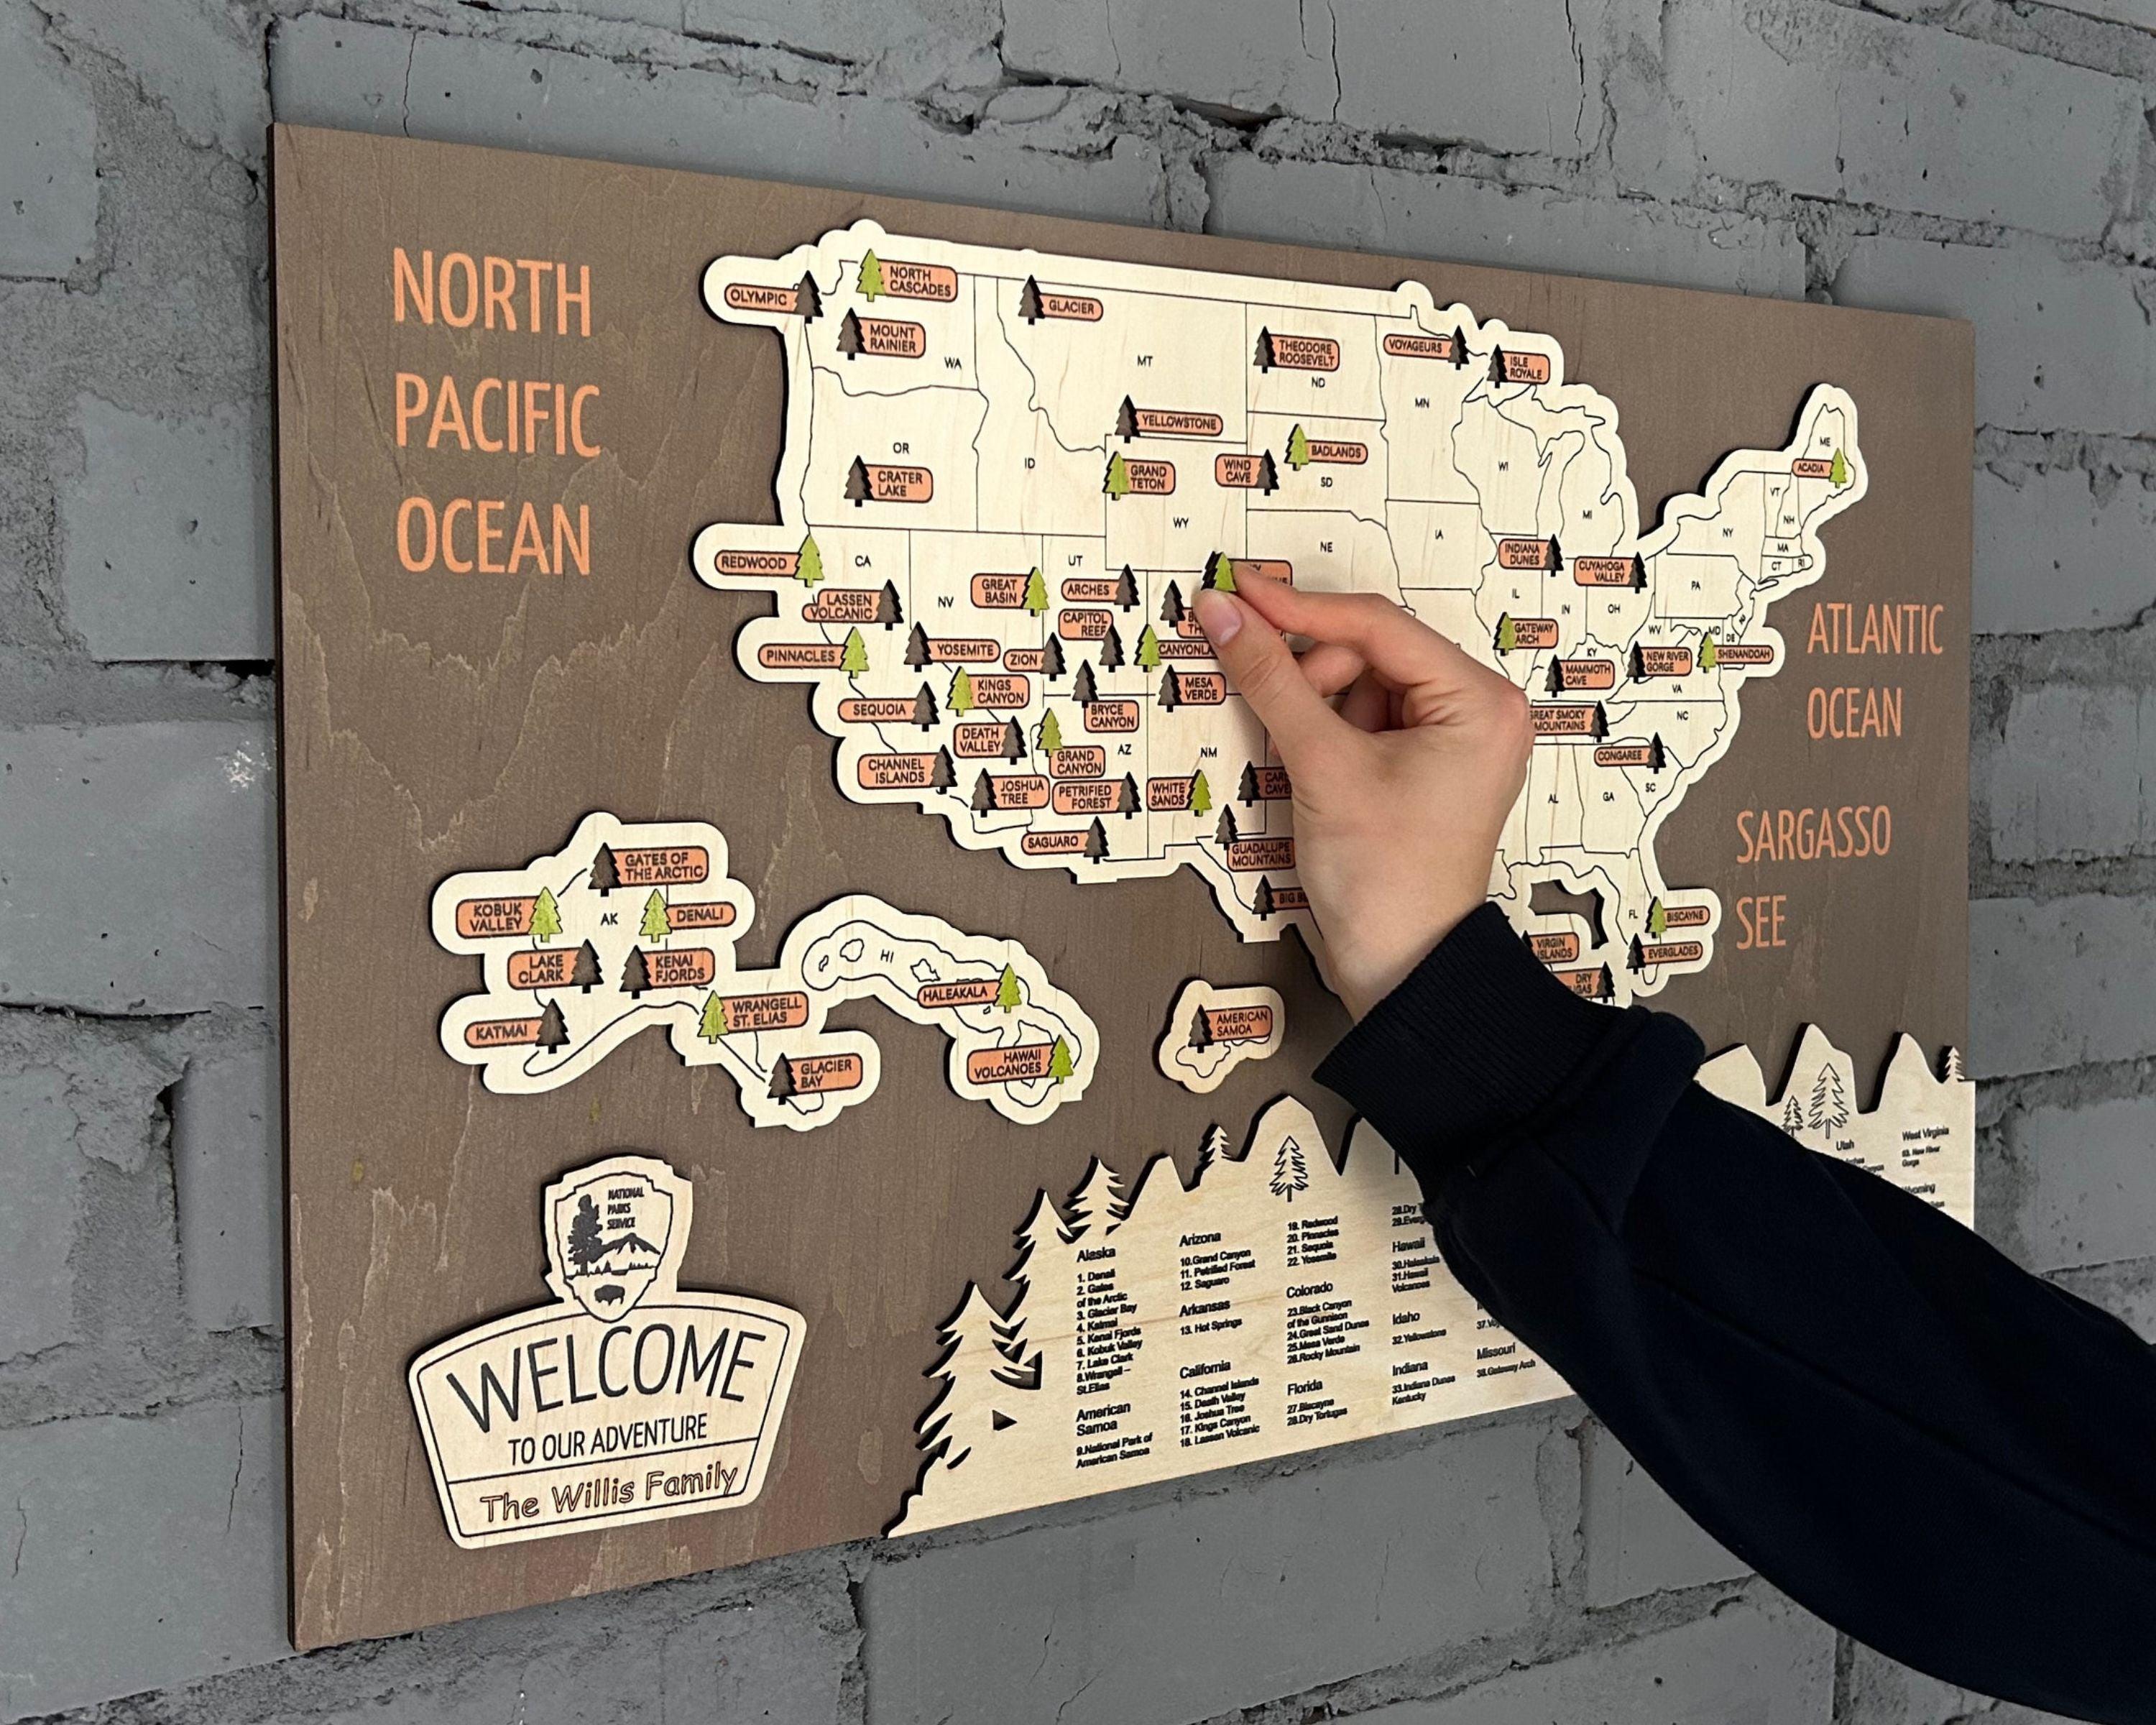 US 3D Wooden National Parks Travel Map With Trees To Record Park Visits (New Brown) - Lemap